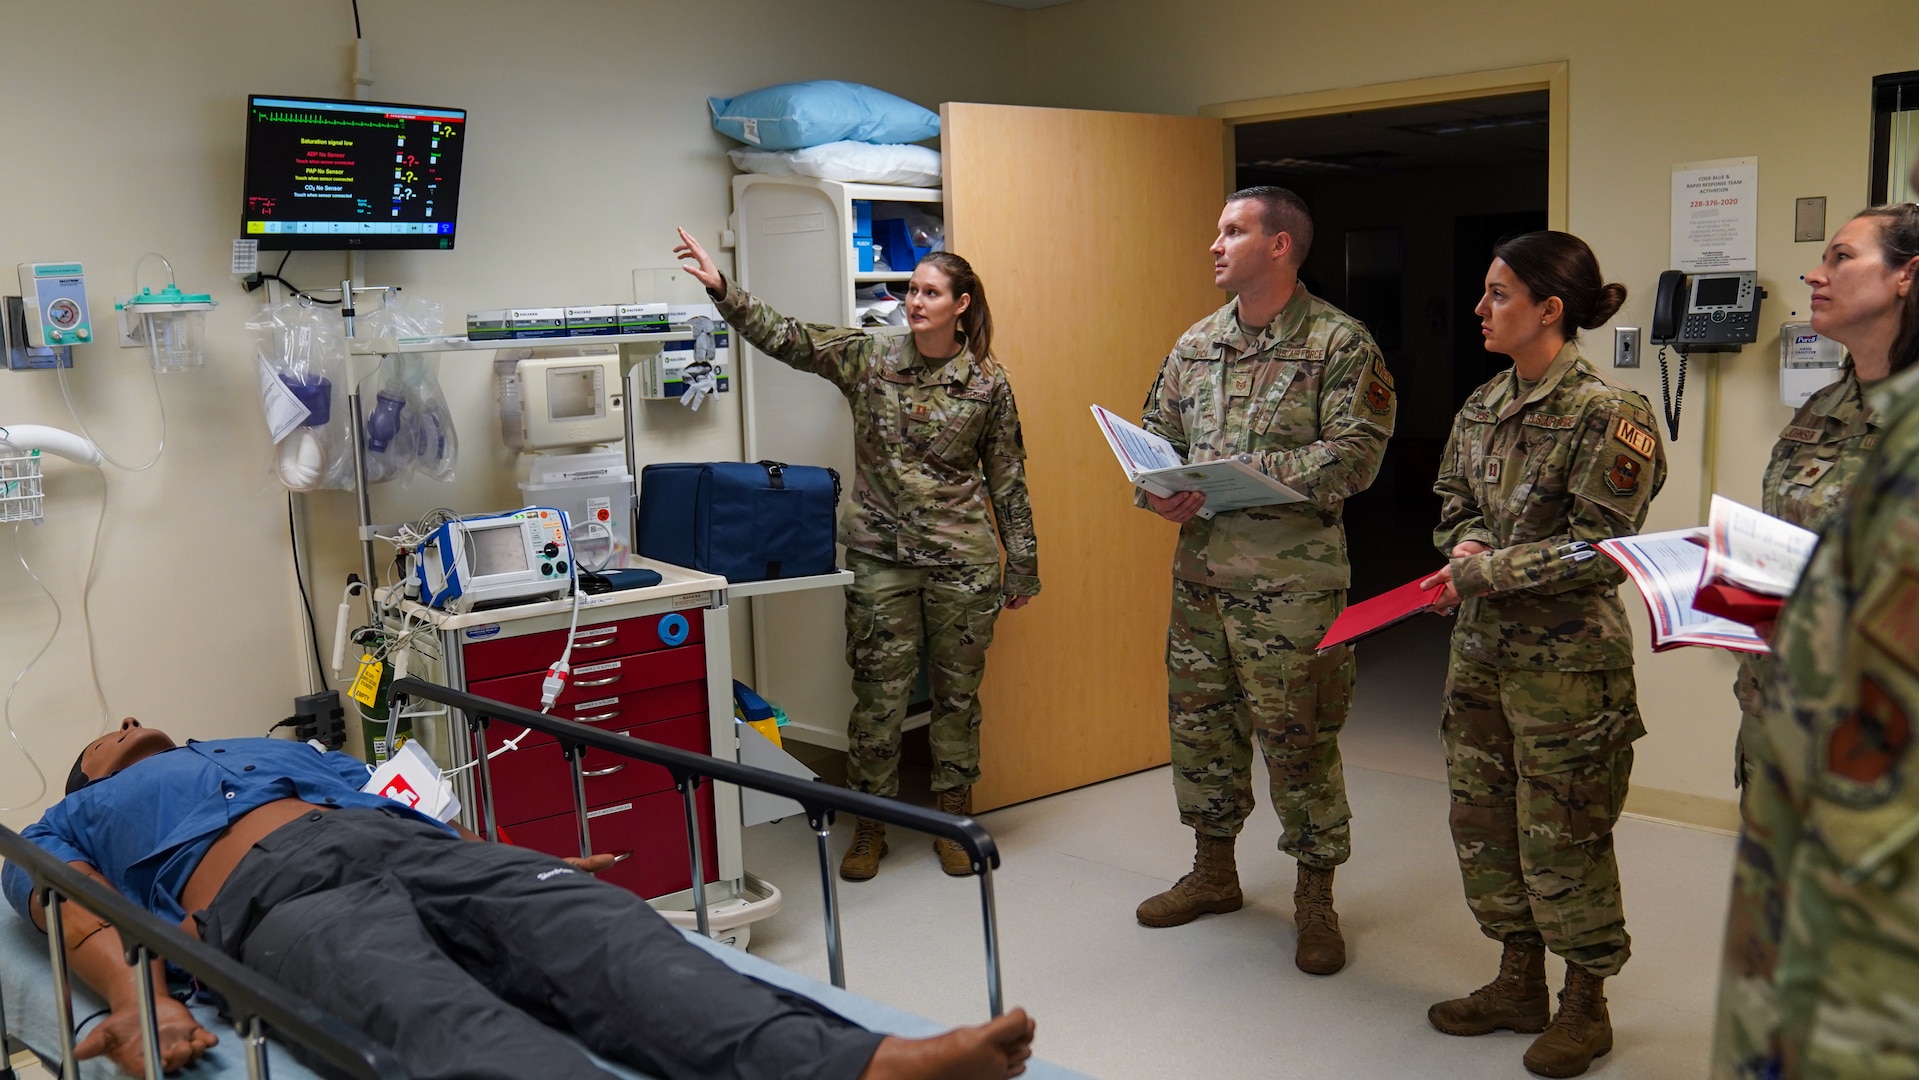 U.S. Air Force Capt. Kimberly Warstler, 81st Healthcare Operations Squadron emergency department flight commander, familiarizes Advanced Life Support Course students with the training equipment in the simulation lab at the Keesler Medical Center on Keesler Air Force Base, Mississippi, May 17, 2023.